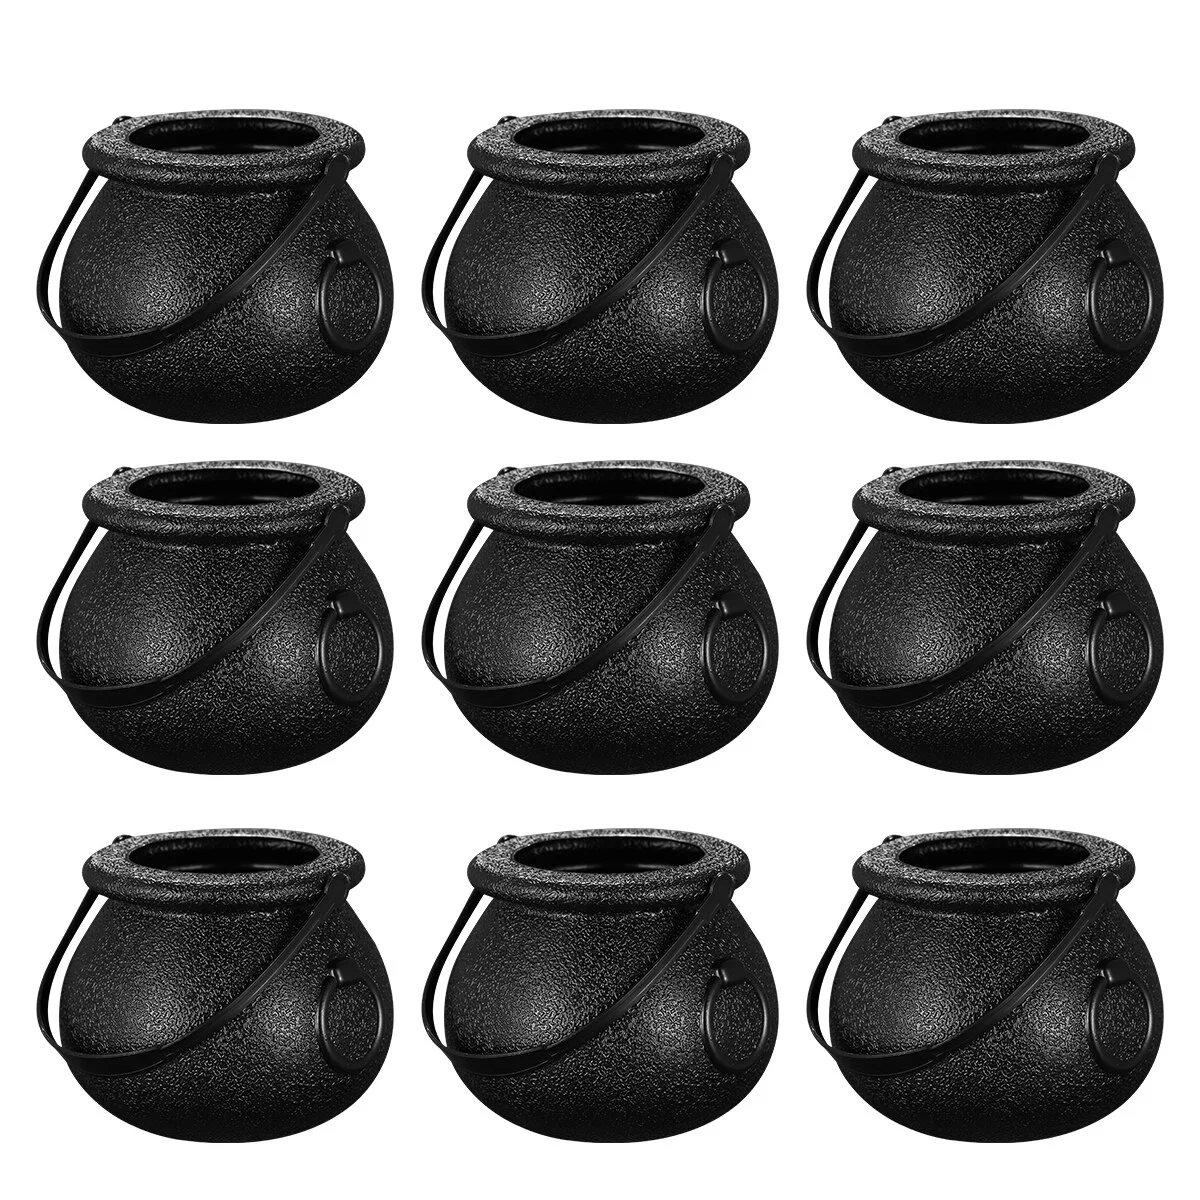 

10PCS Decor Bucket Candy Cauldron Kettles Black Cauldron Trick or Treat Candy Bucket Witch Container for Kids Festival Pot of